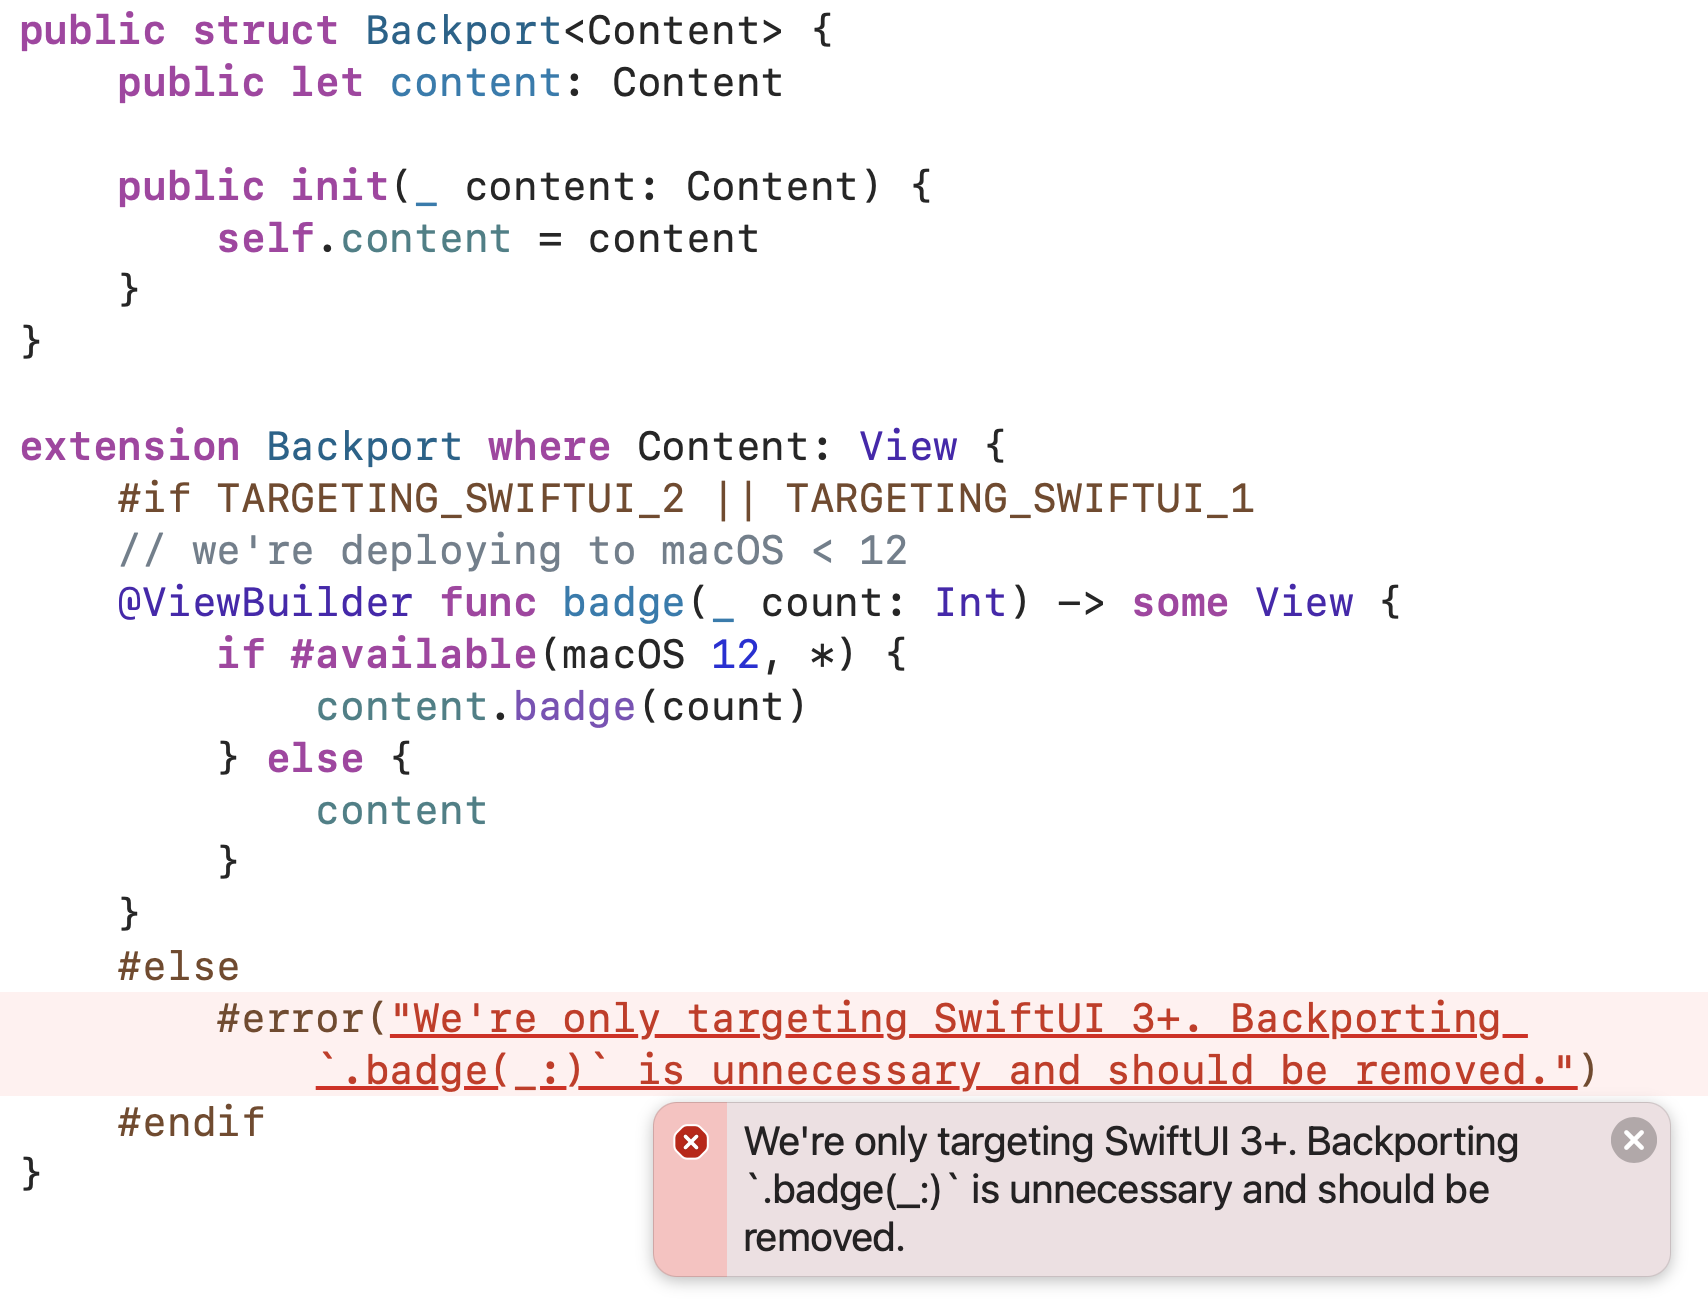 After adjusting the deployment target, our code now produces a compilation error.